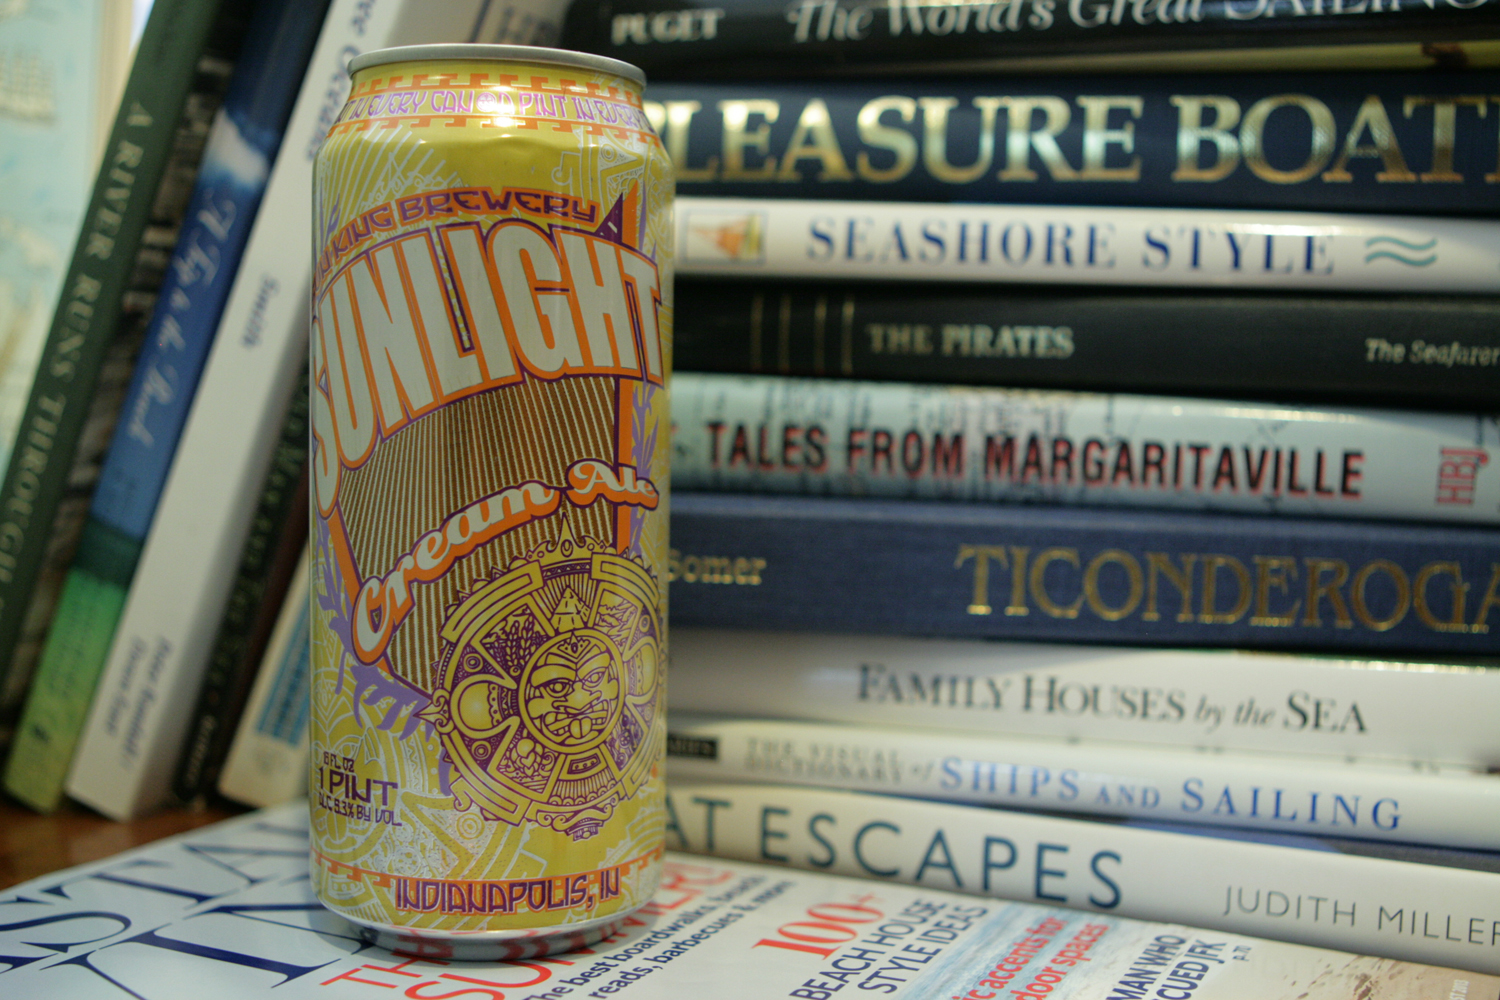 Let Sunlight summer cream ale into your life this season.